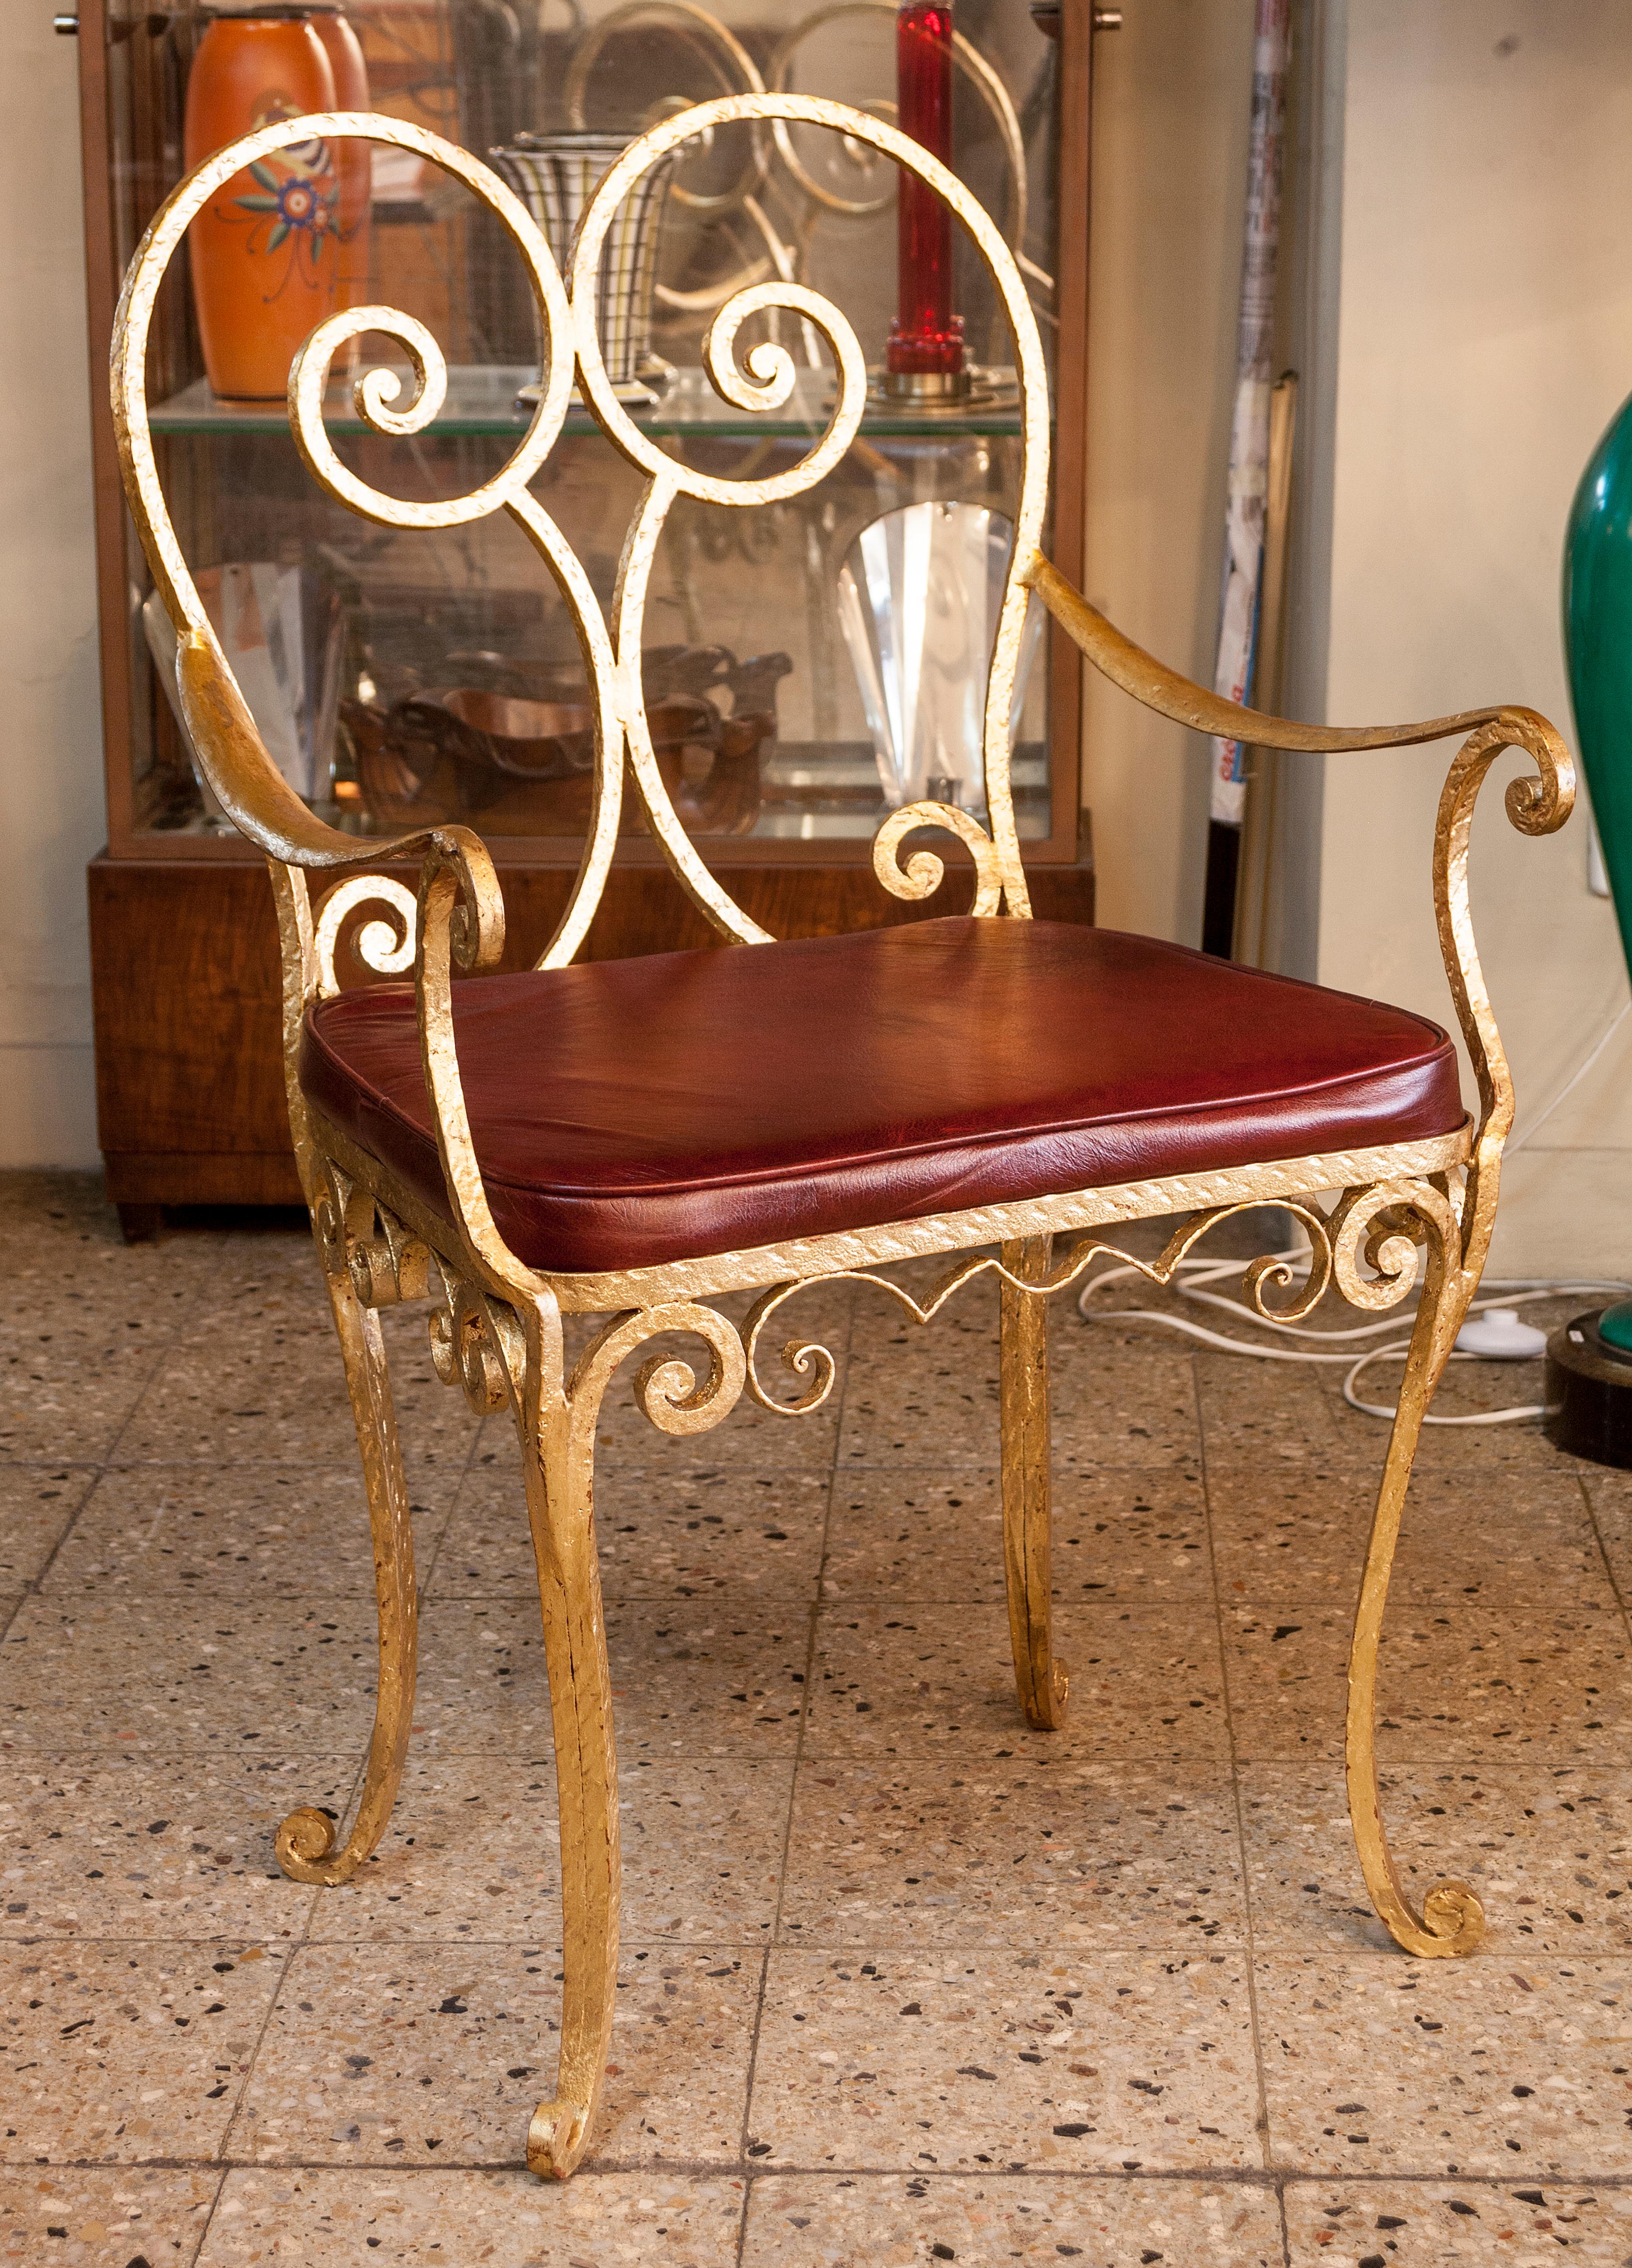 Armchairs Art Deco

Year 1920
Materials :Leather and golden iron
Country: French
Elegant and sophisticated armchairs.
You want to live in the golden years, these are the armchairs your project needs.
We have specialized in the sale of Art Deco and